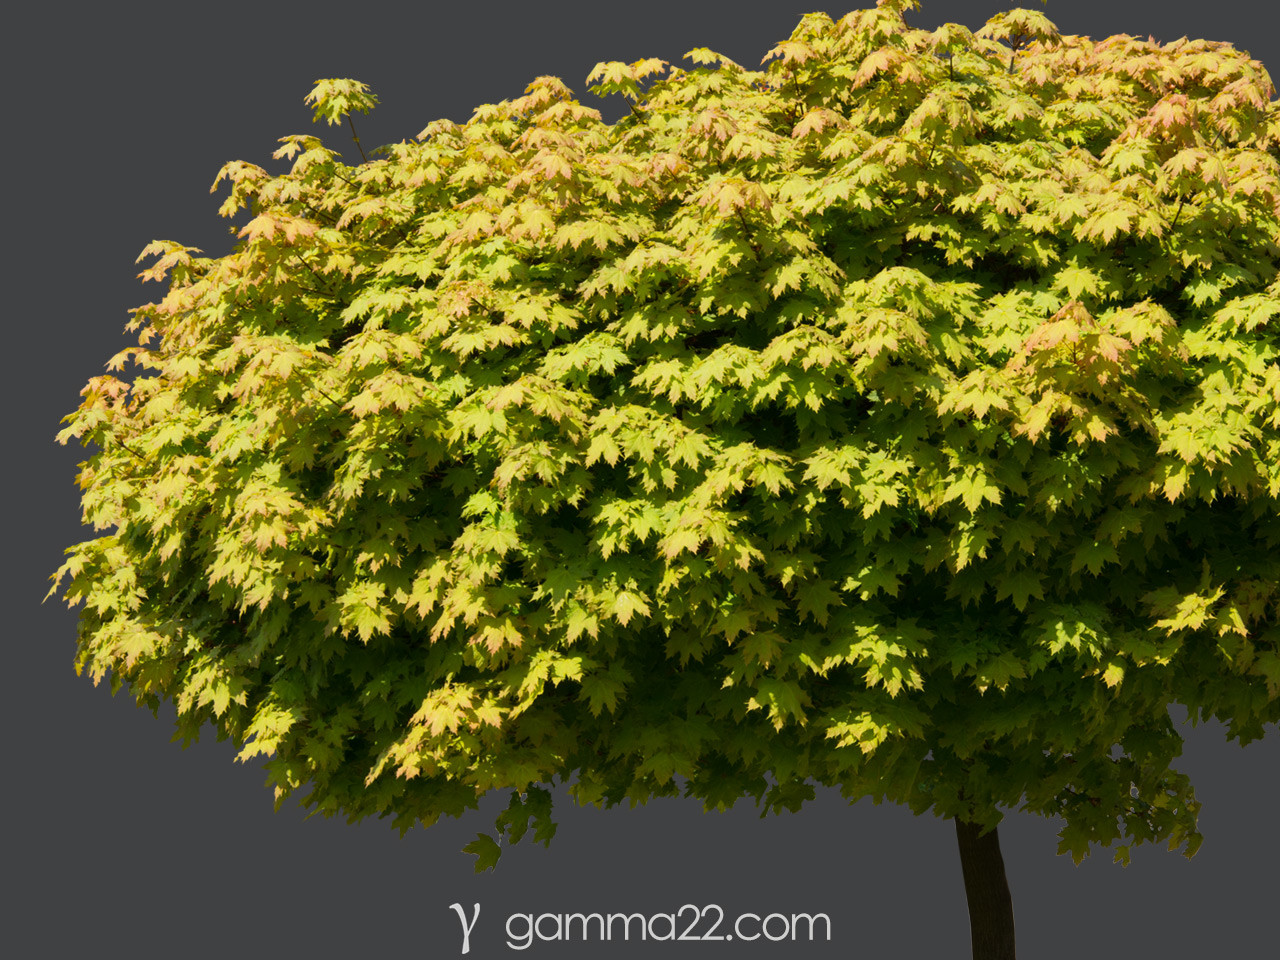 ArtStation - 15 TREE & BUSH CUTOUTS in PNG format | Resources